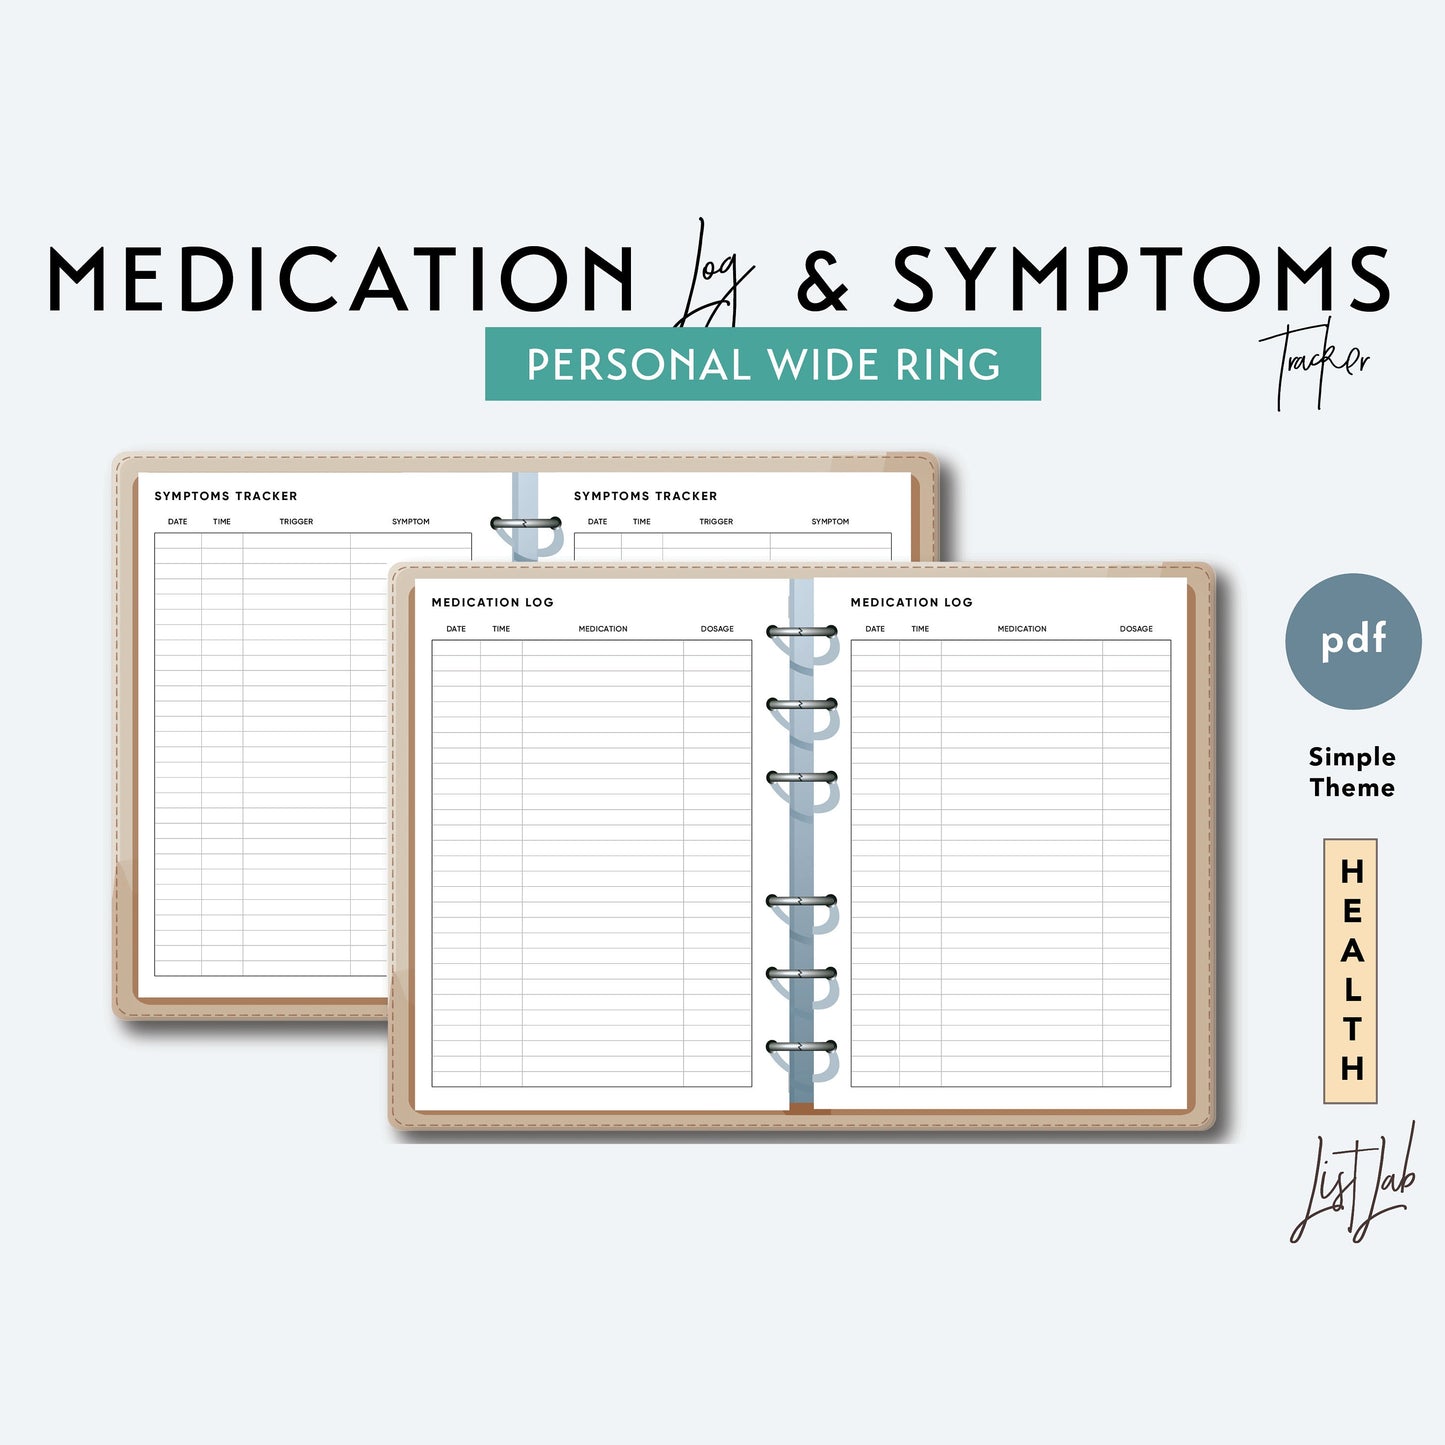 Personal Wide Ring MEDICATION Log and SYMPTOMS Trackers Printable Insert Set